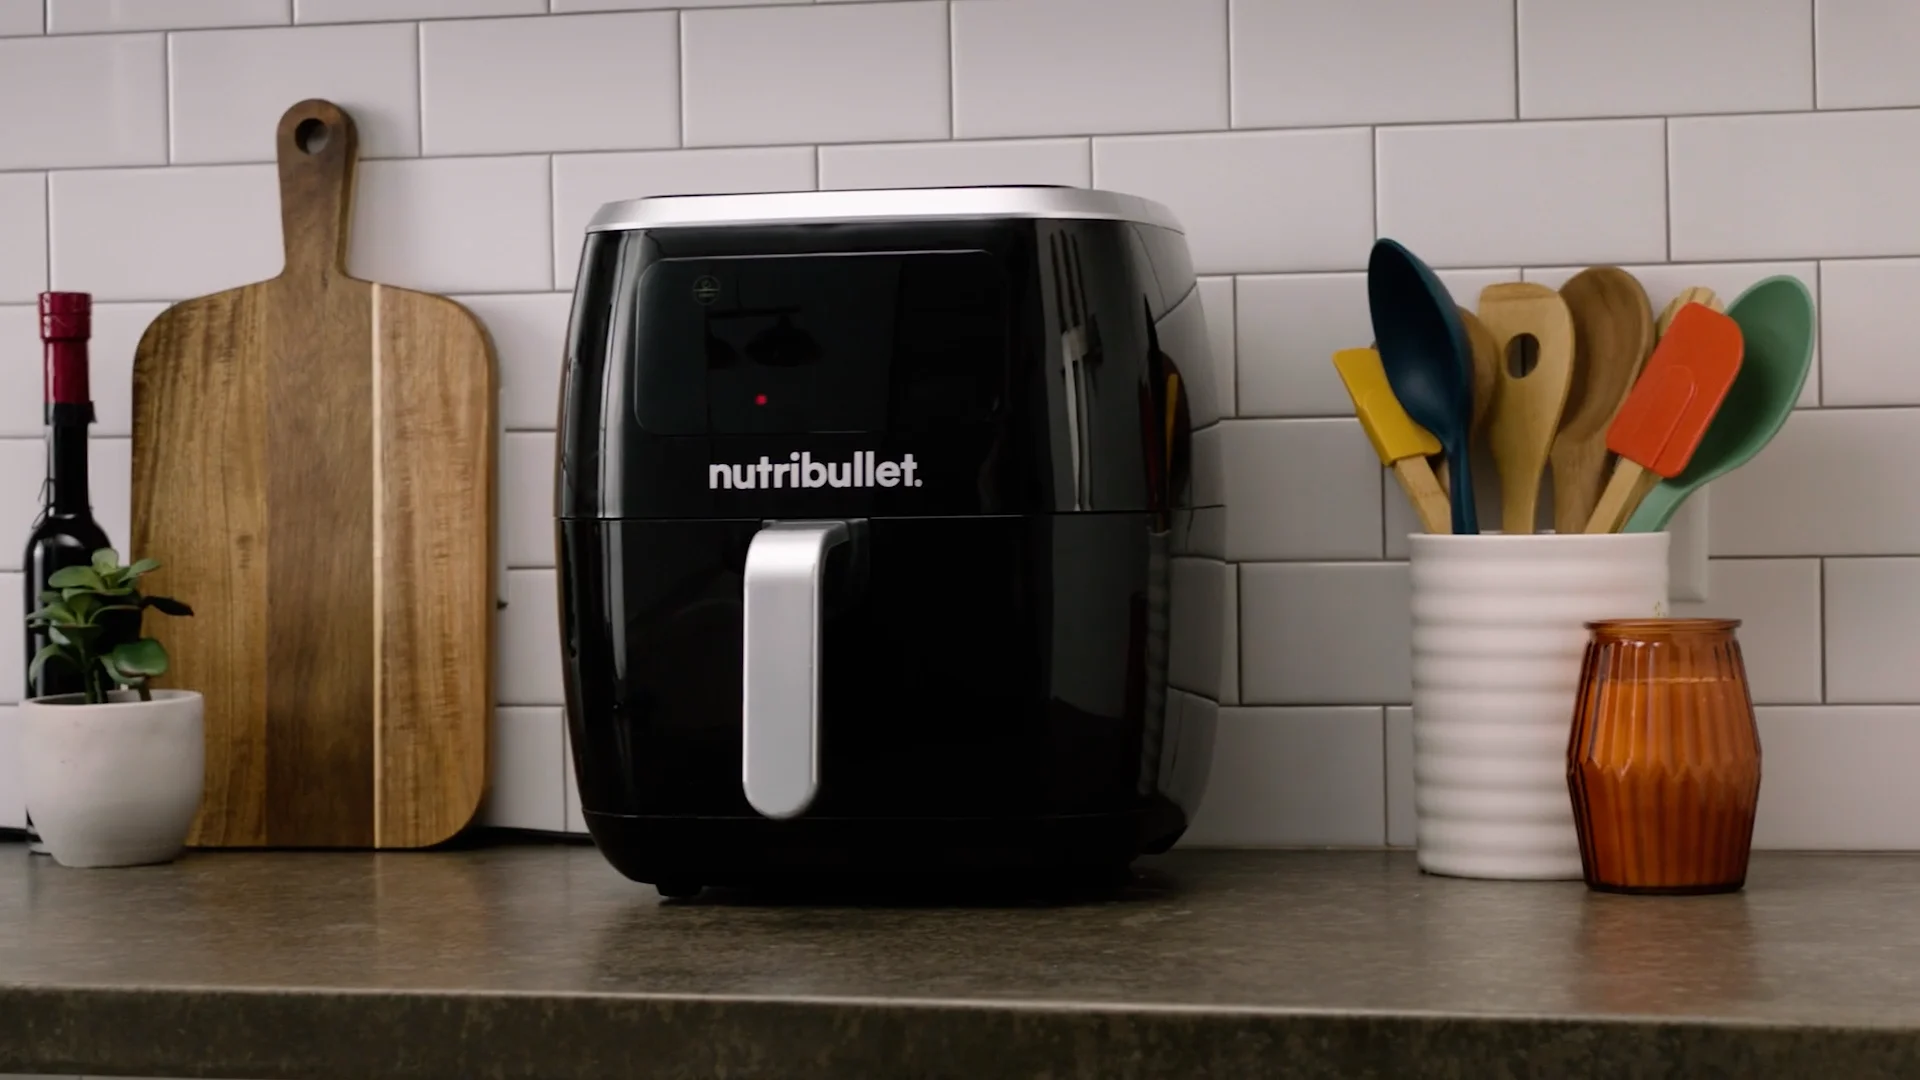 nutribullet - The Magic Bullet® Air Fryer quickly and neatly